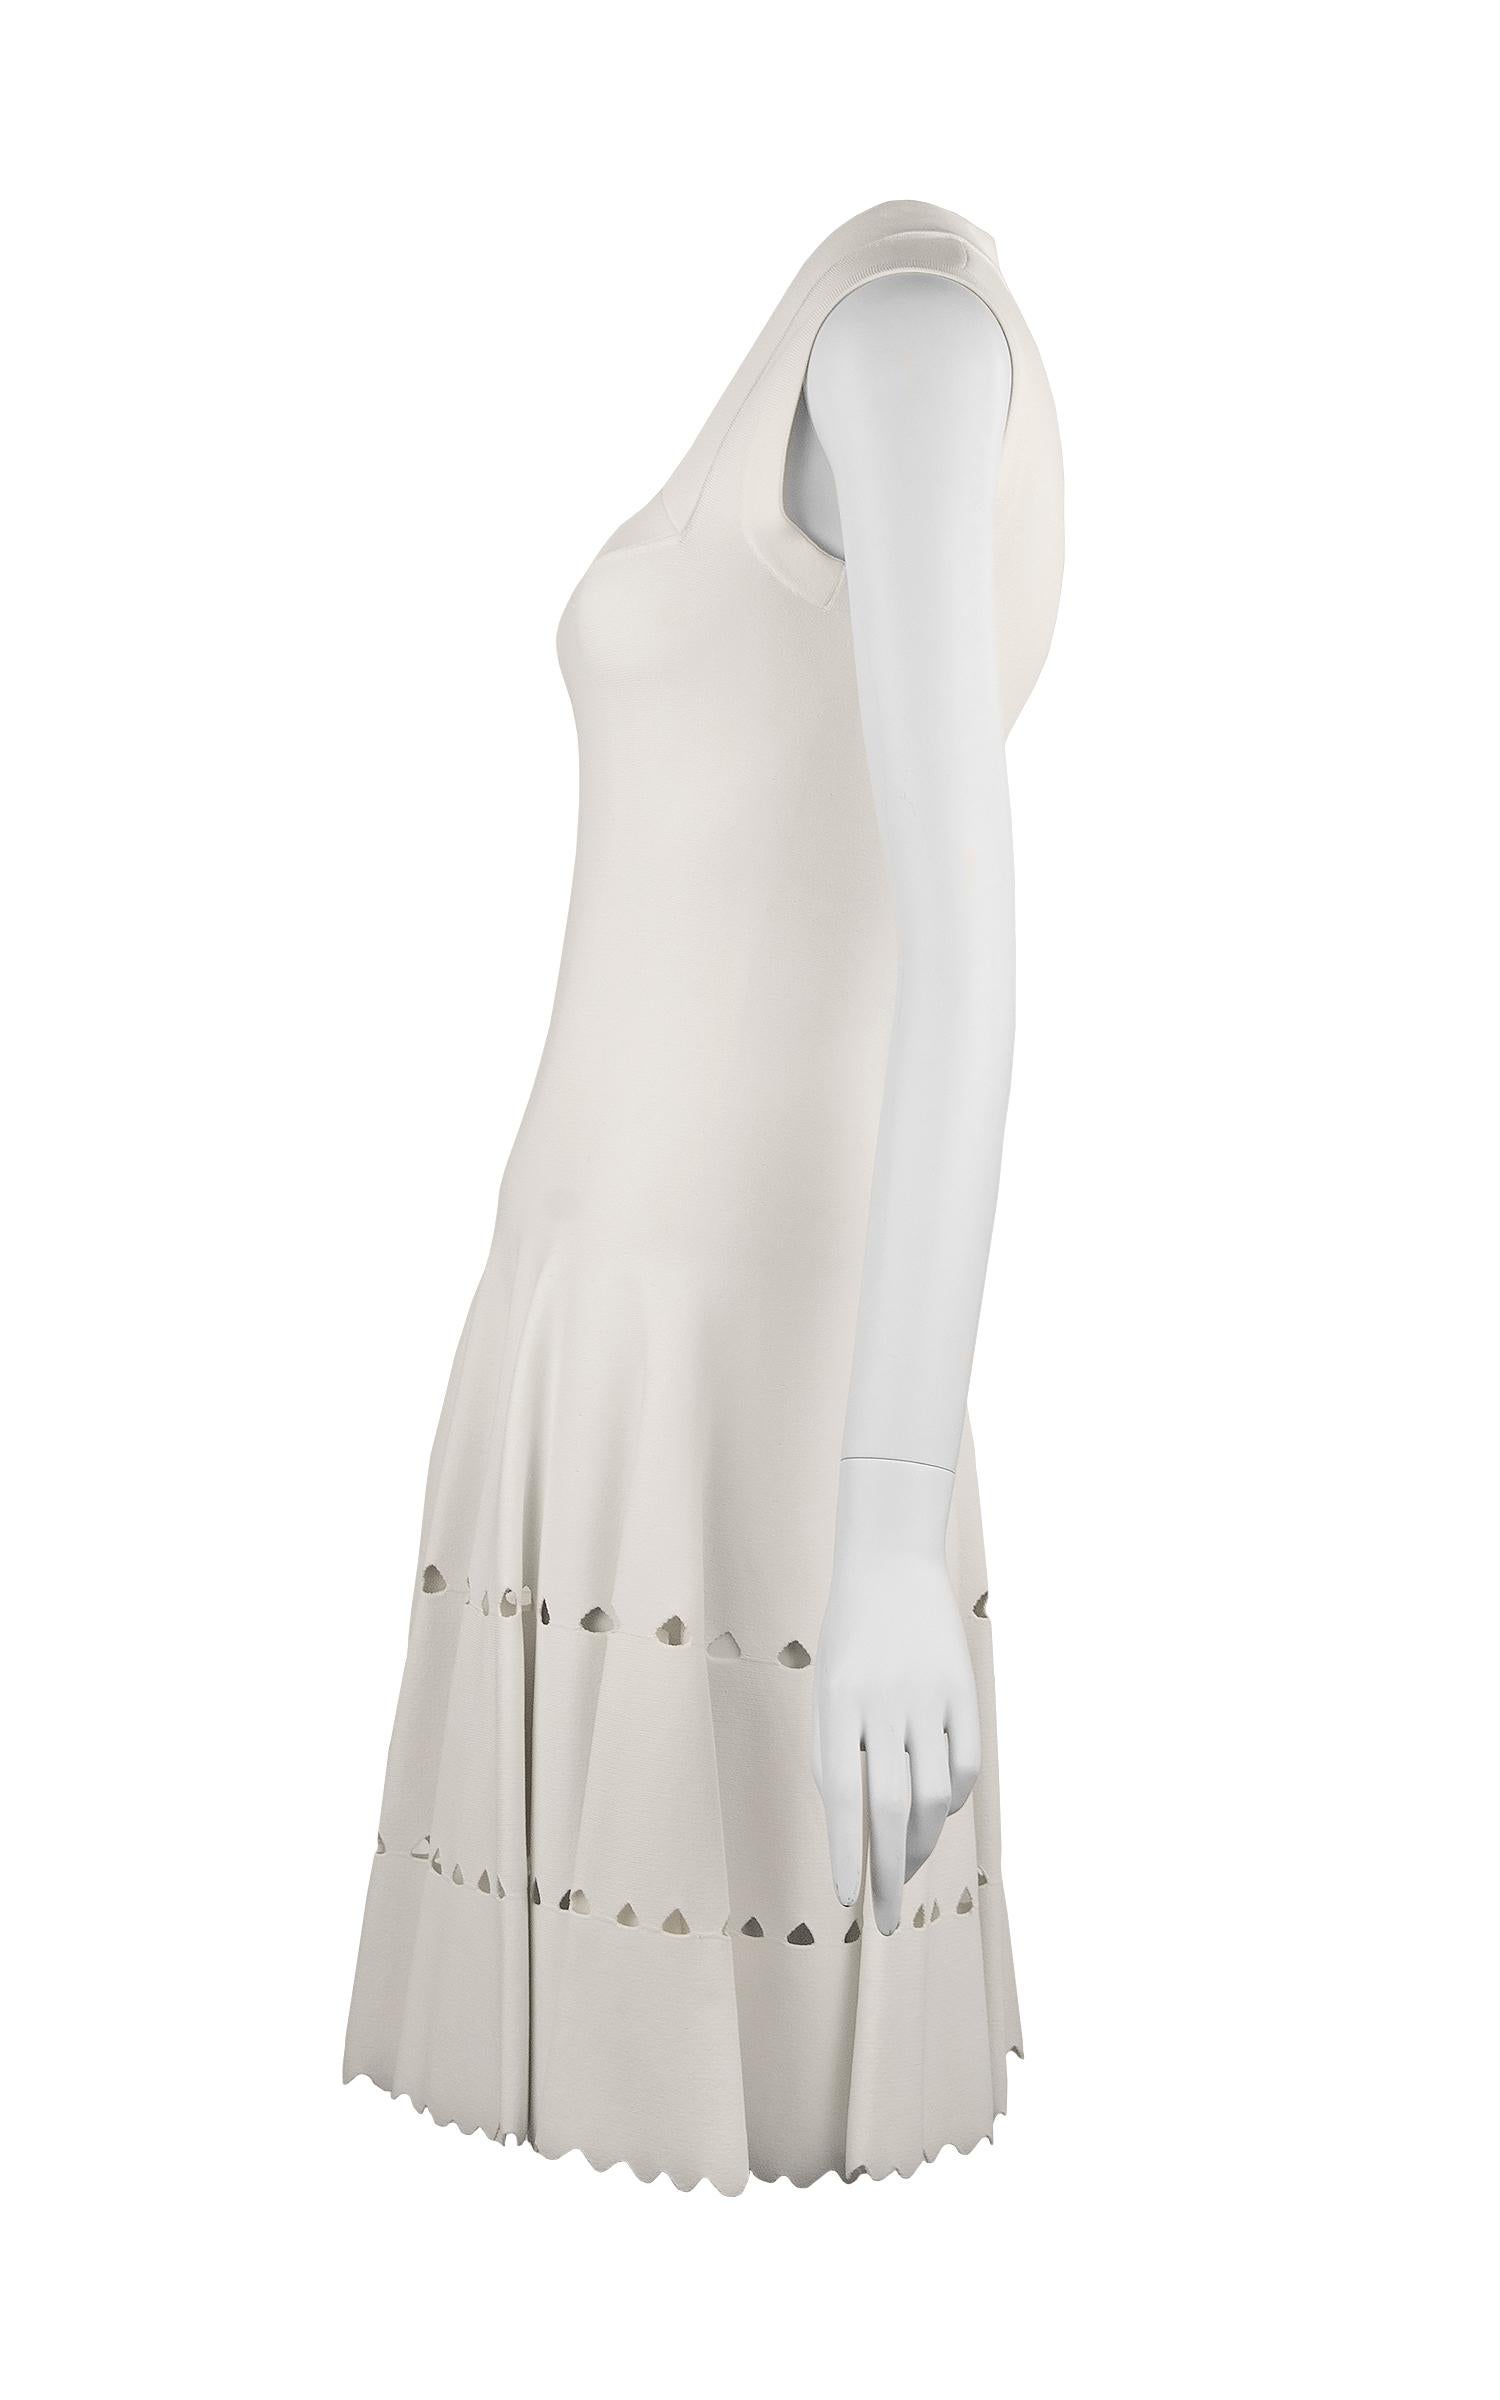 Gorgeous white Alaia fit and flare dress in a stunning knit fabric that has laser cut detail along the skirt.  Features a square neckline with a delicate scalloped finish on the edges. 

Size: FR 36

Condition: New with tags

Composition: 85%